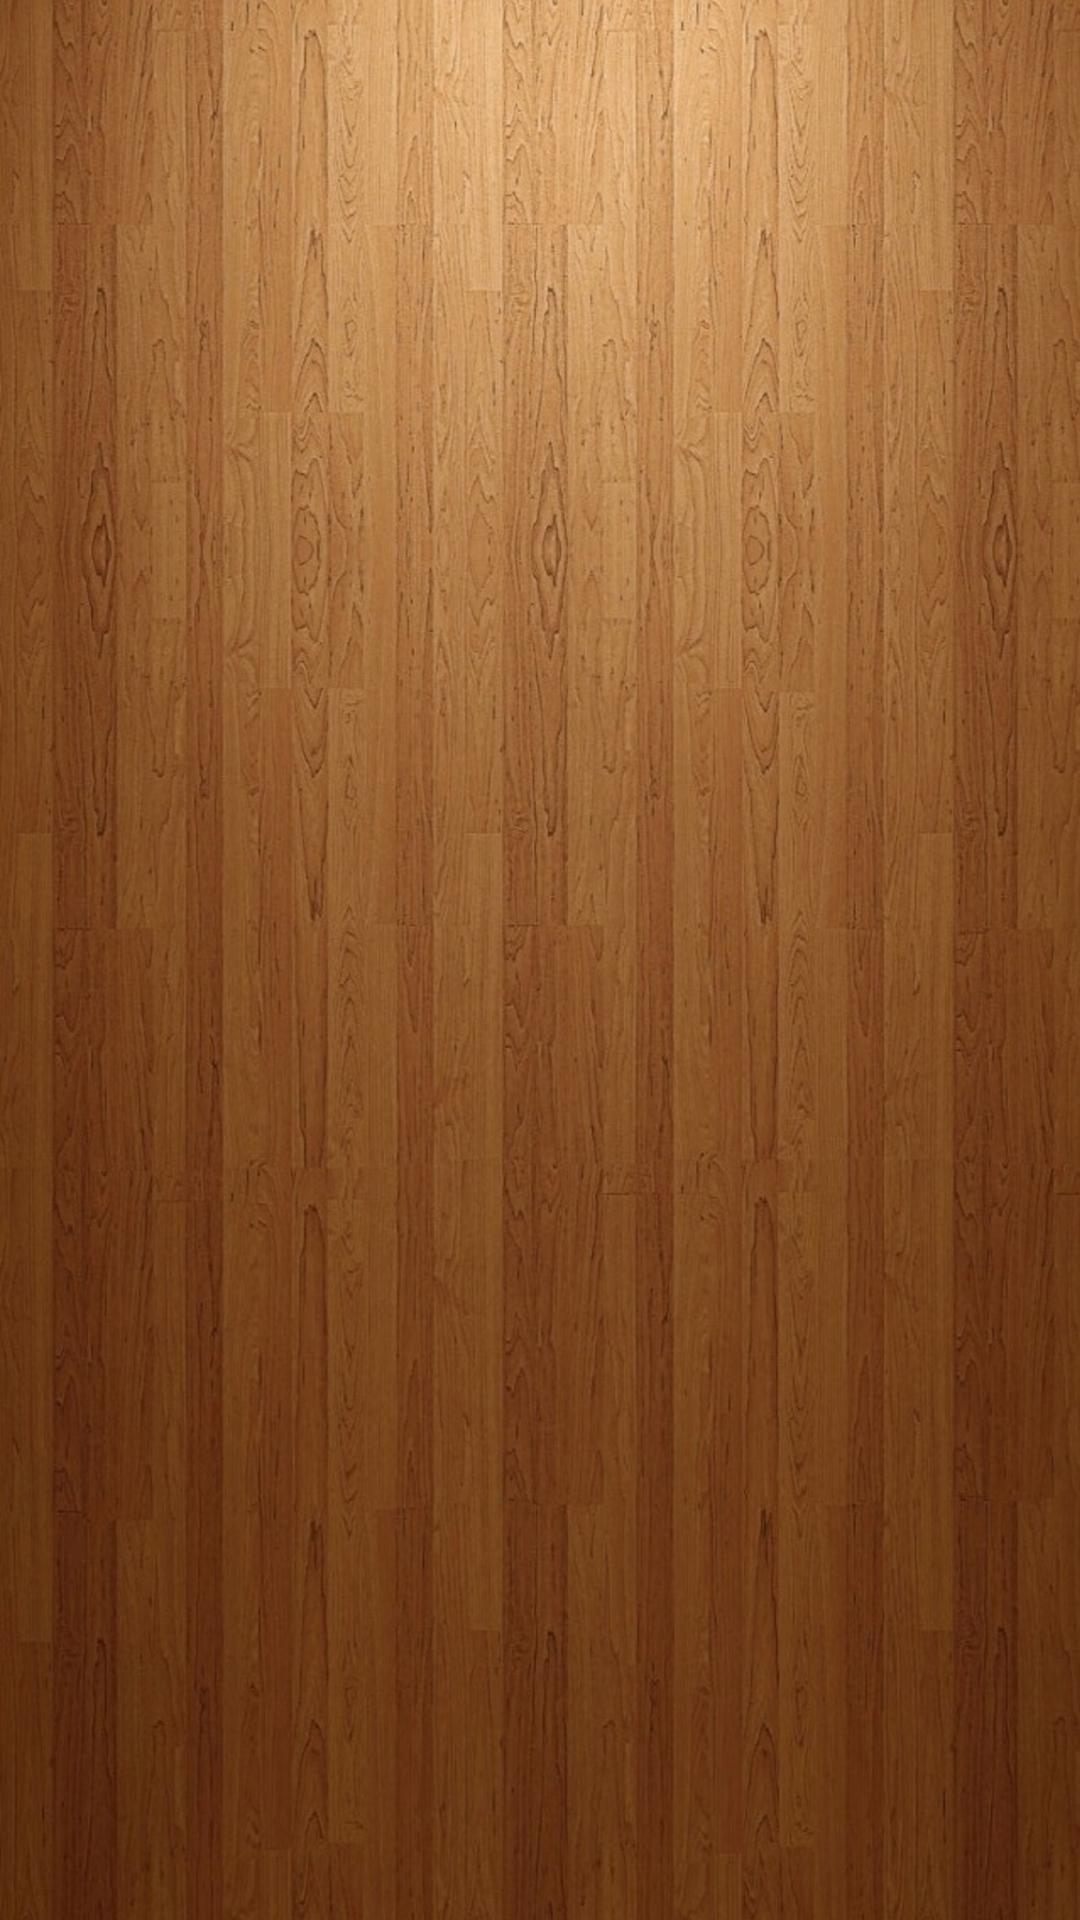 Abstract Minimal Wooden Texture Background iPhone 8